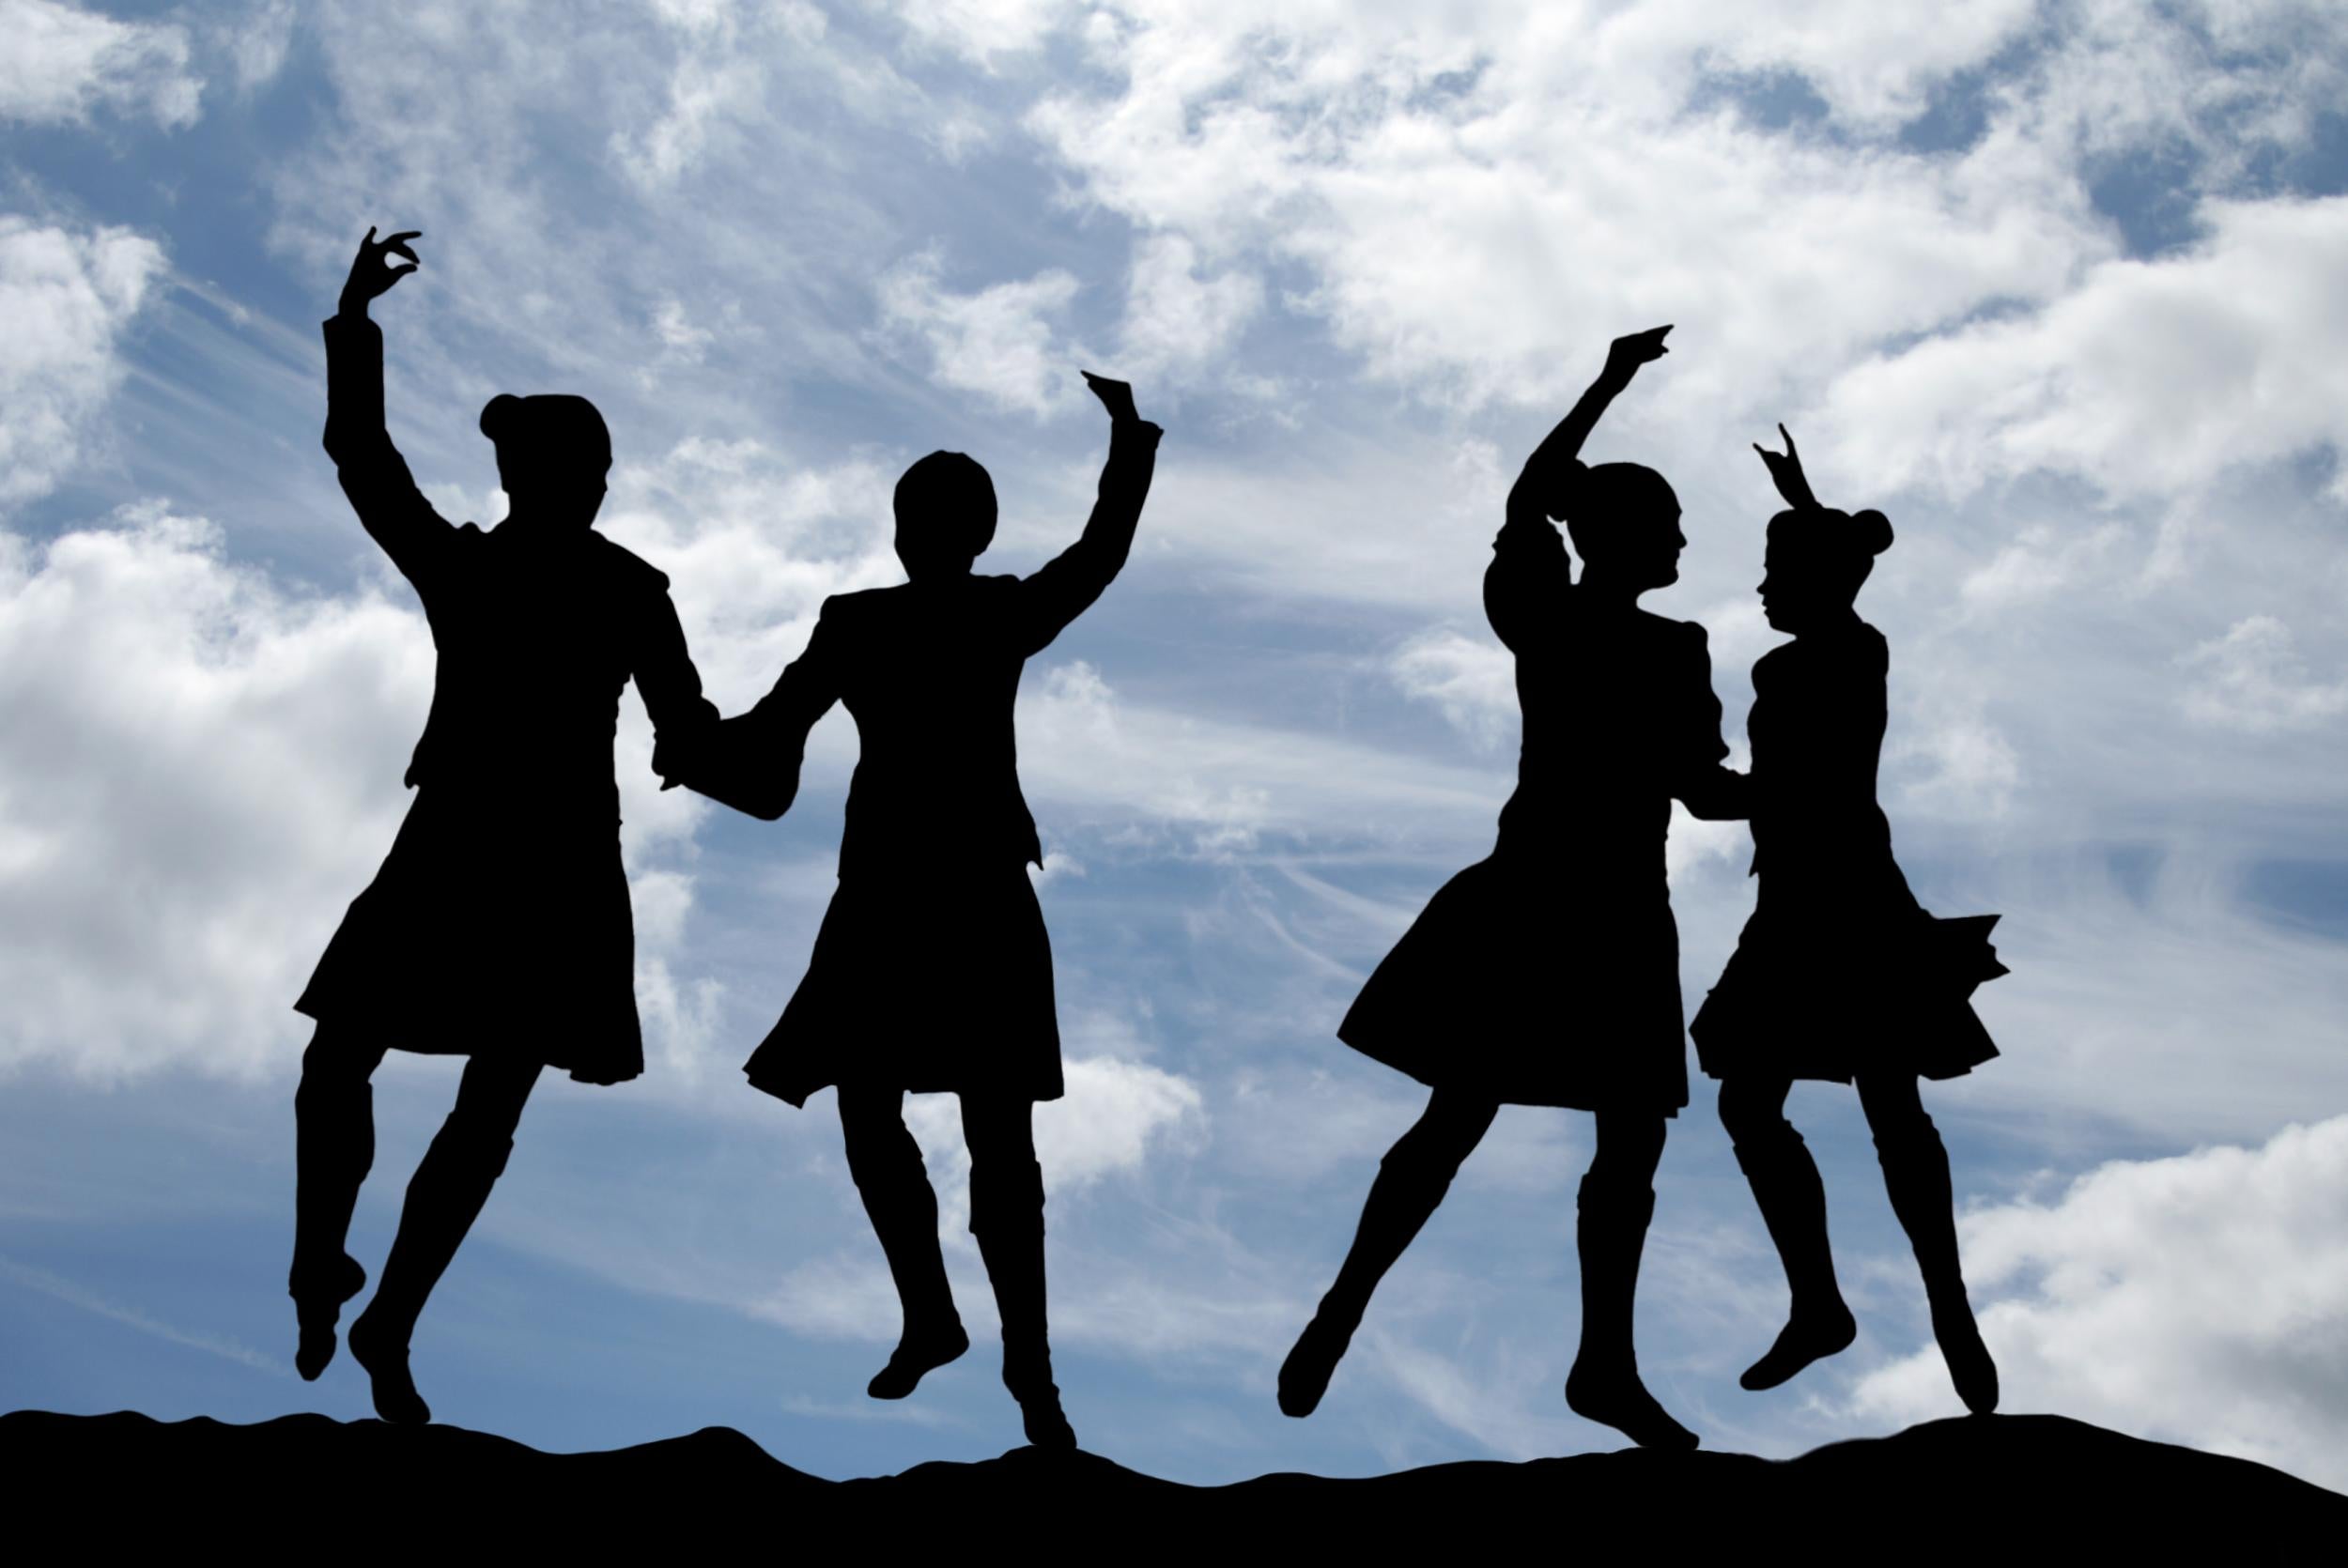 Dizzying turns: you need your wits about you during Scottish country dancing